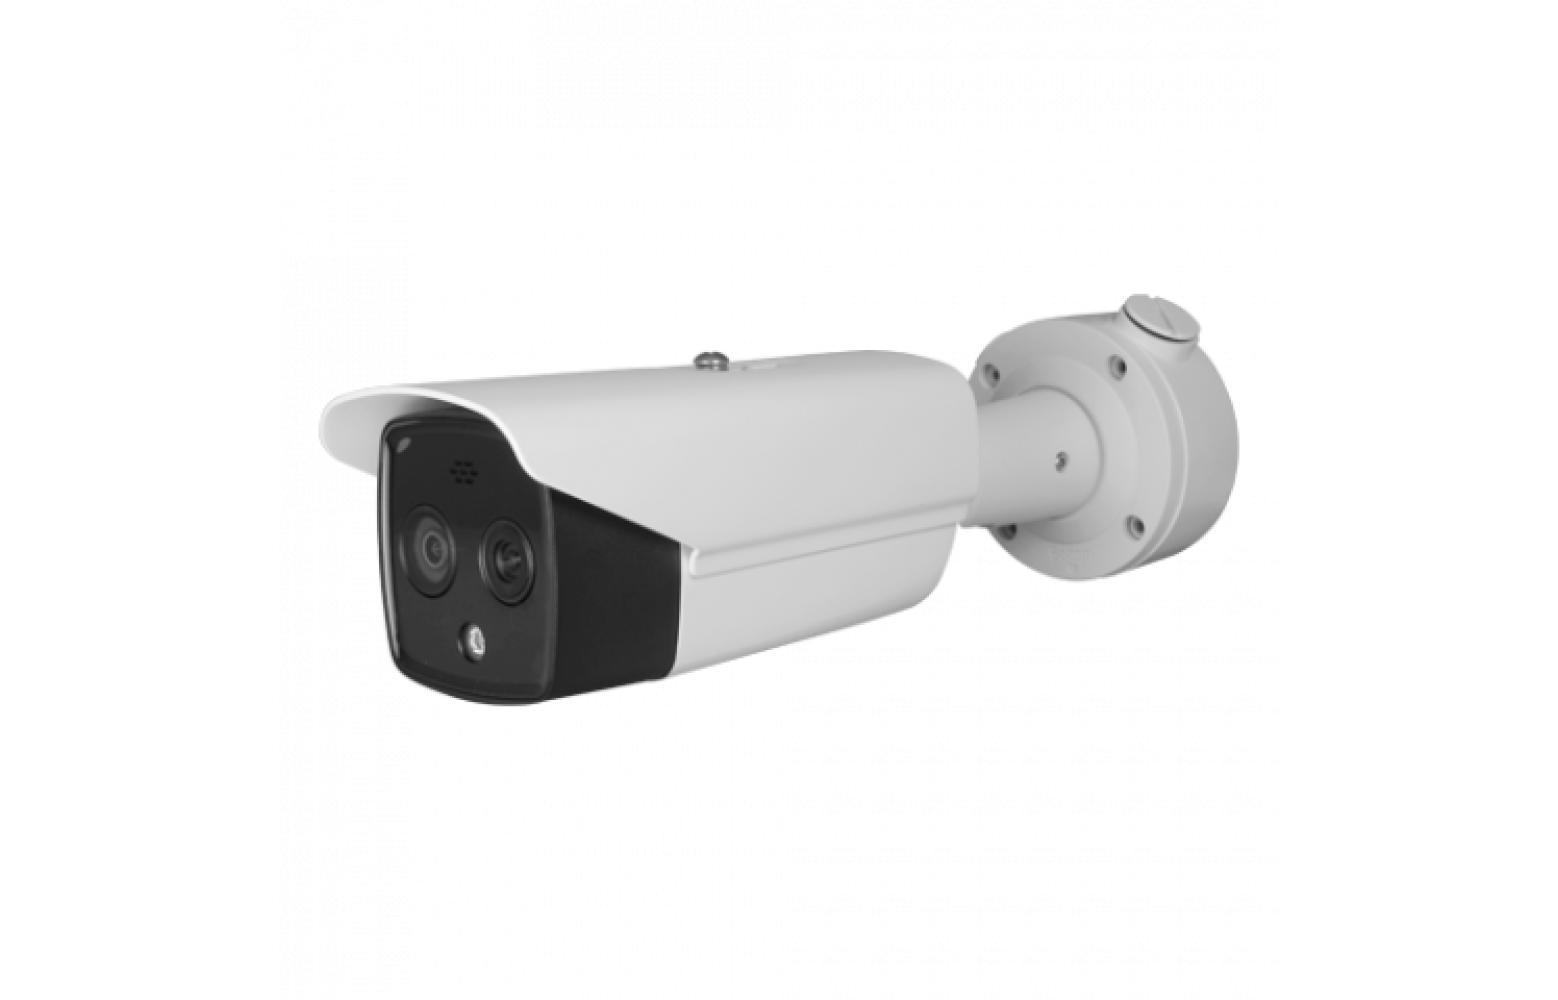 HIKVISION DS-2TD2617B-3/PA